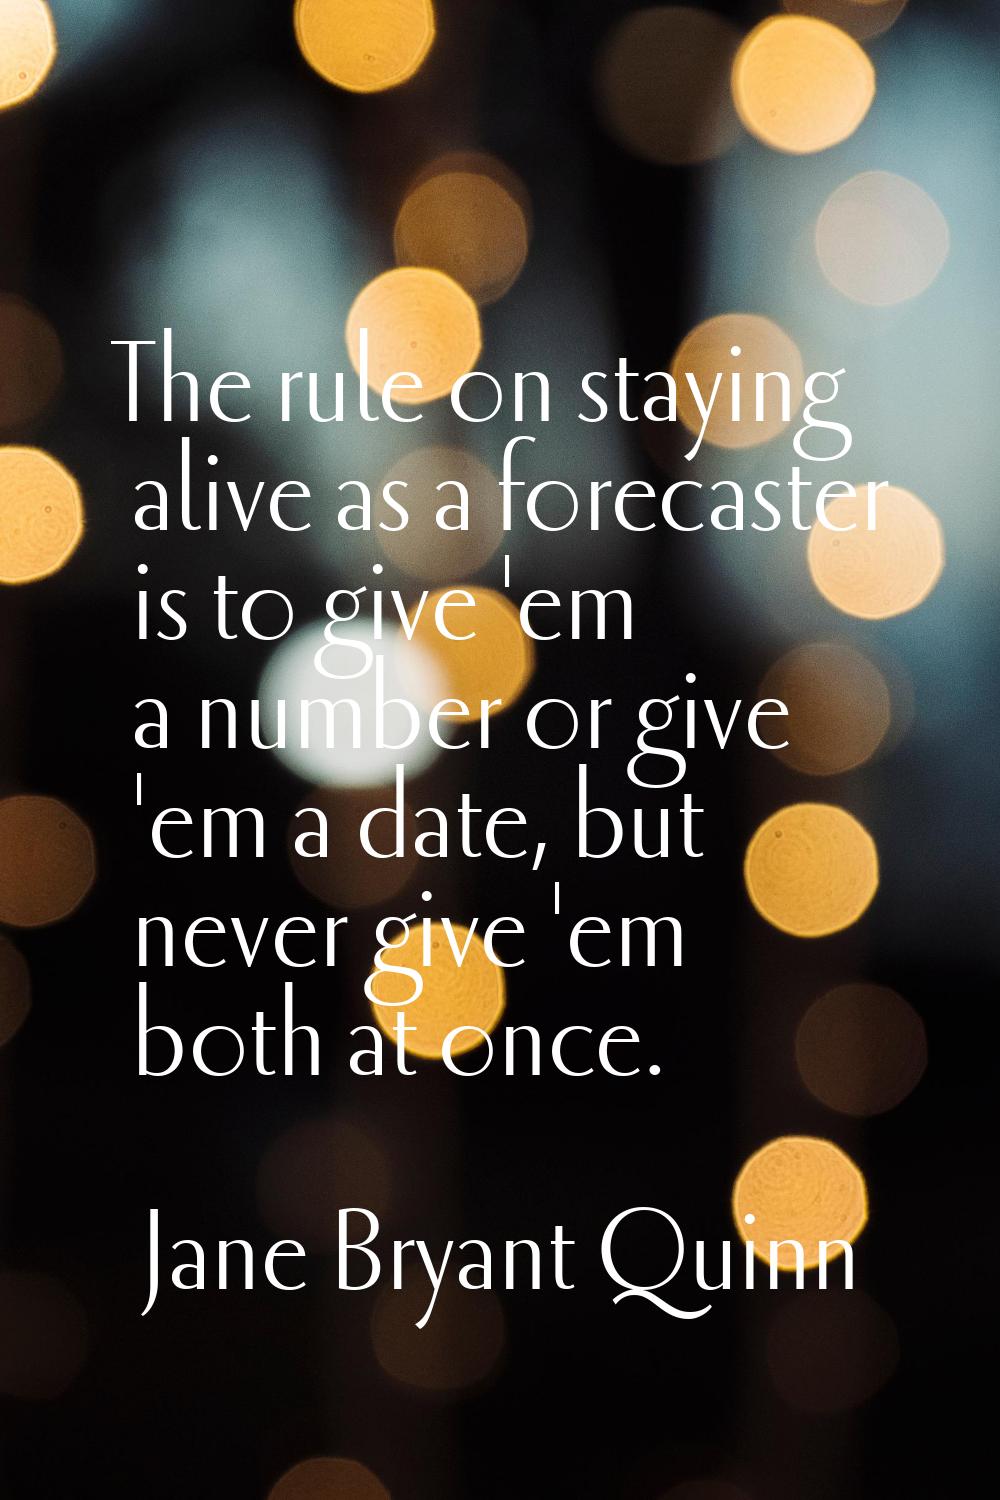 The rule on staying alive as a forecaster is to give 'em a number or give 'em a date, but never giv